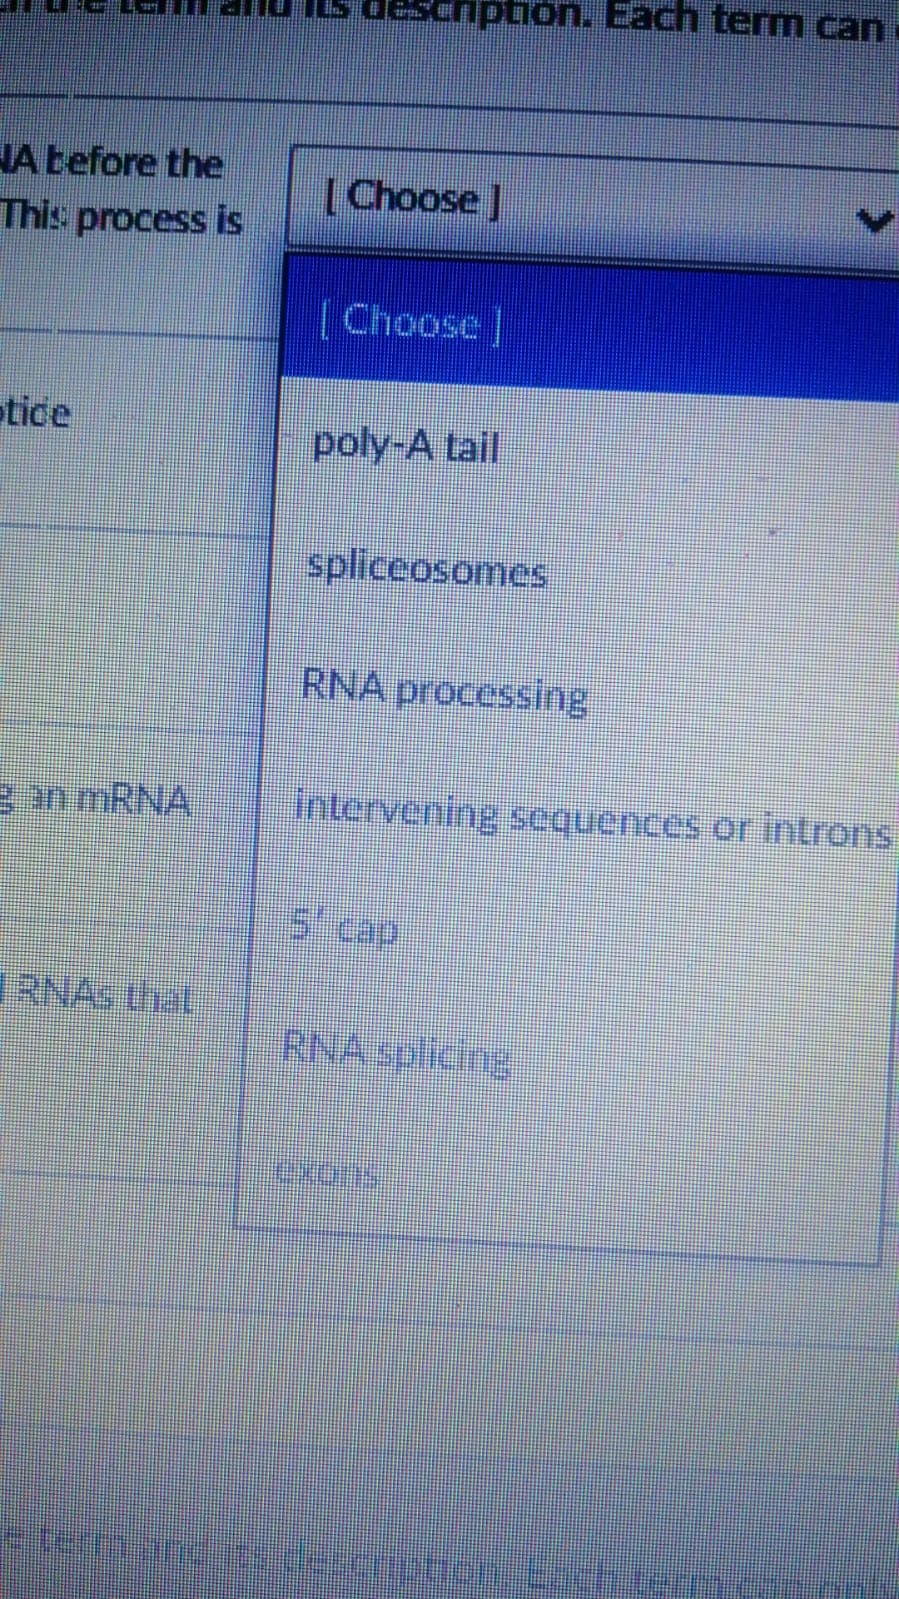 nption. Each term can
JA before the
This process is
[Choose]
[Choose
etice
poly-A tail
spliceosomes
RNA processing
ean MRNA
intervening sequences or introns
RNAS that
ENA DICing
